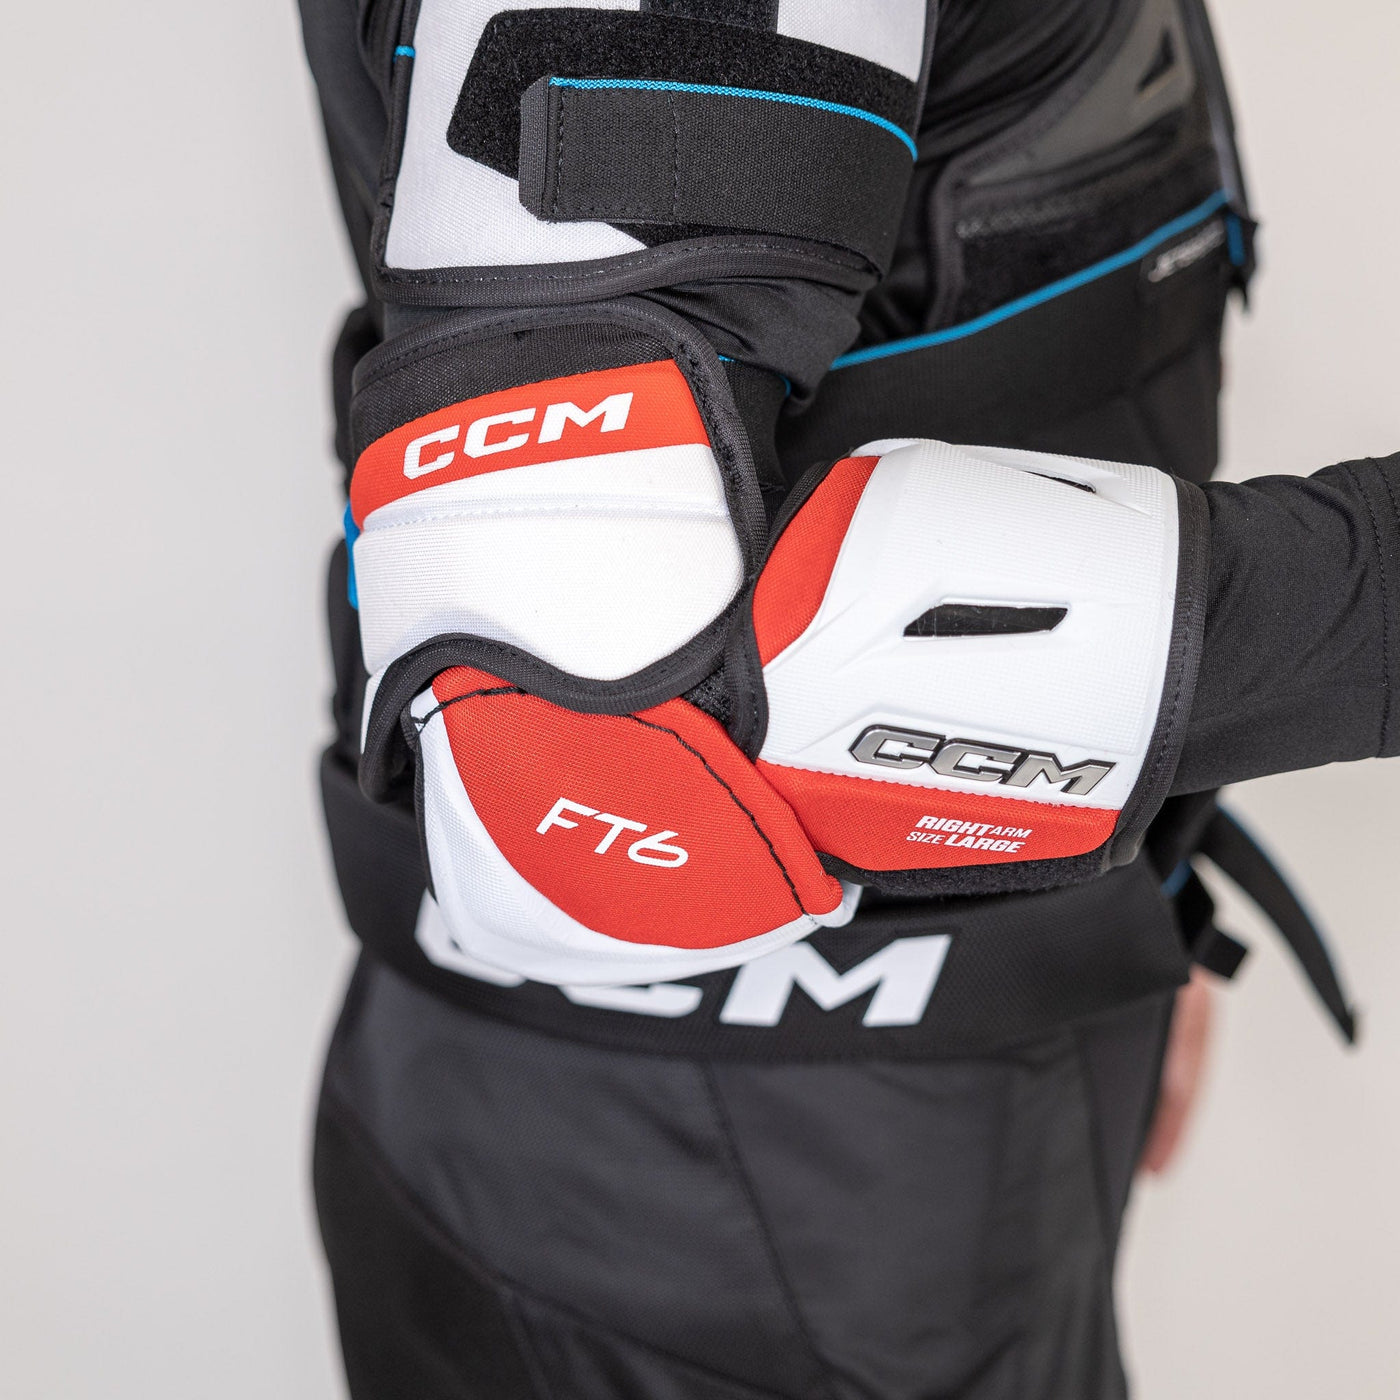 CCM Jetspeed FT6 Junior Hockey Elbow Pads - The Hockey Shop Source For Sports